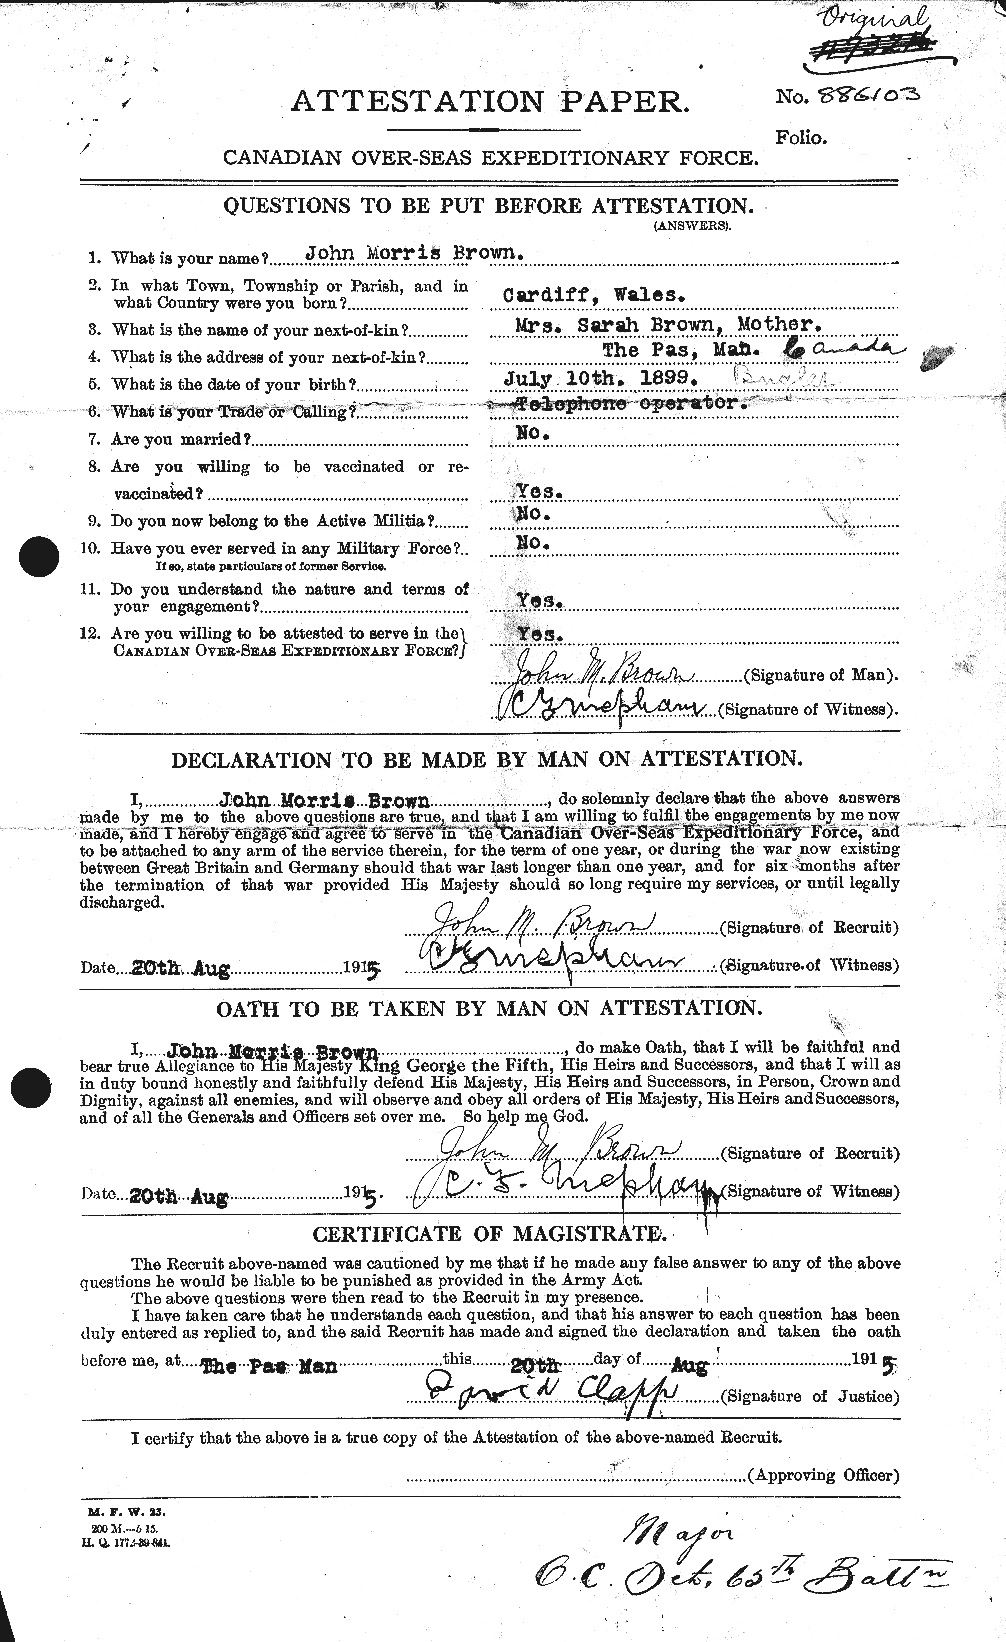 Personnel Records of the First World War - CEF 265844a